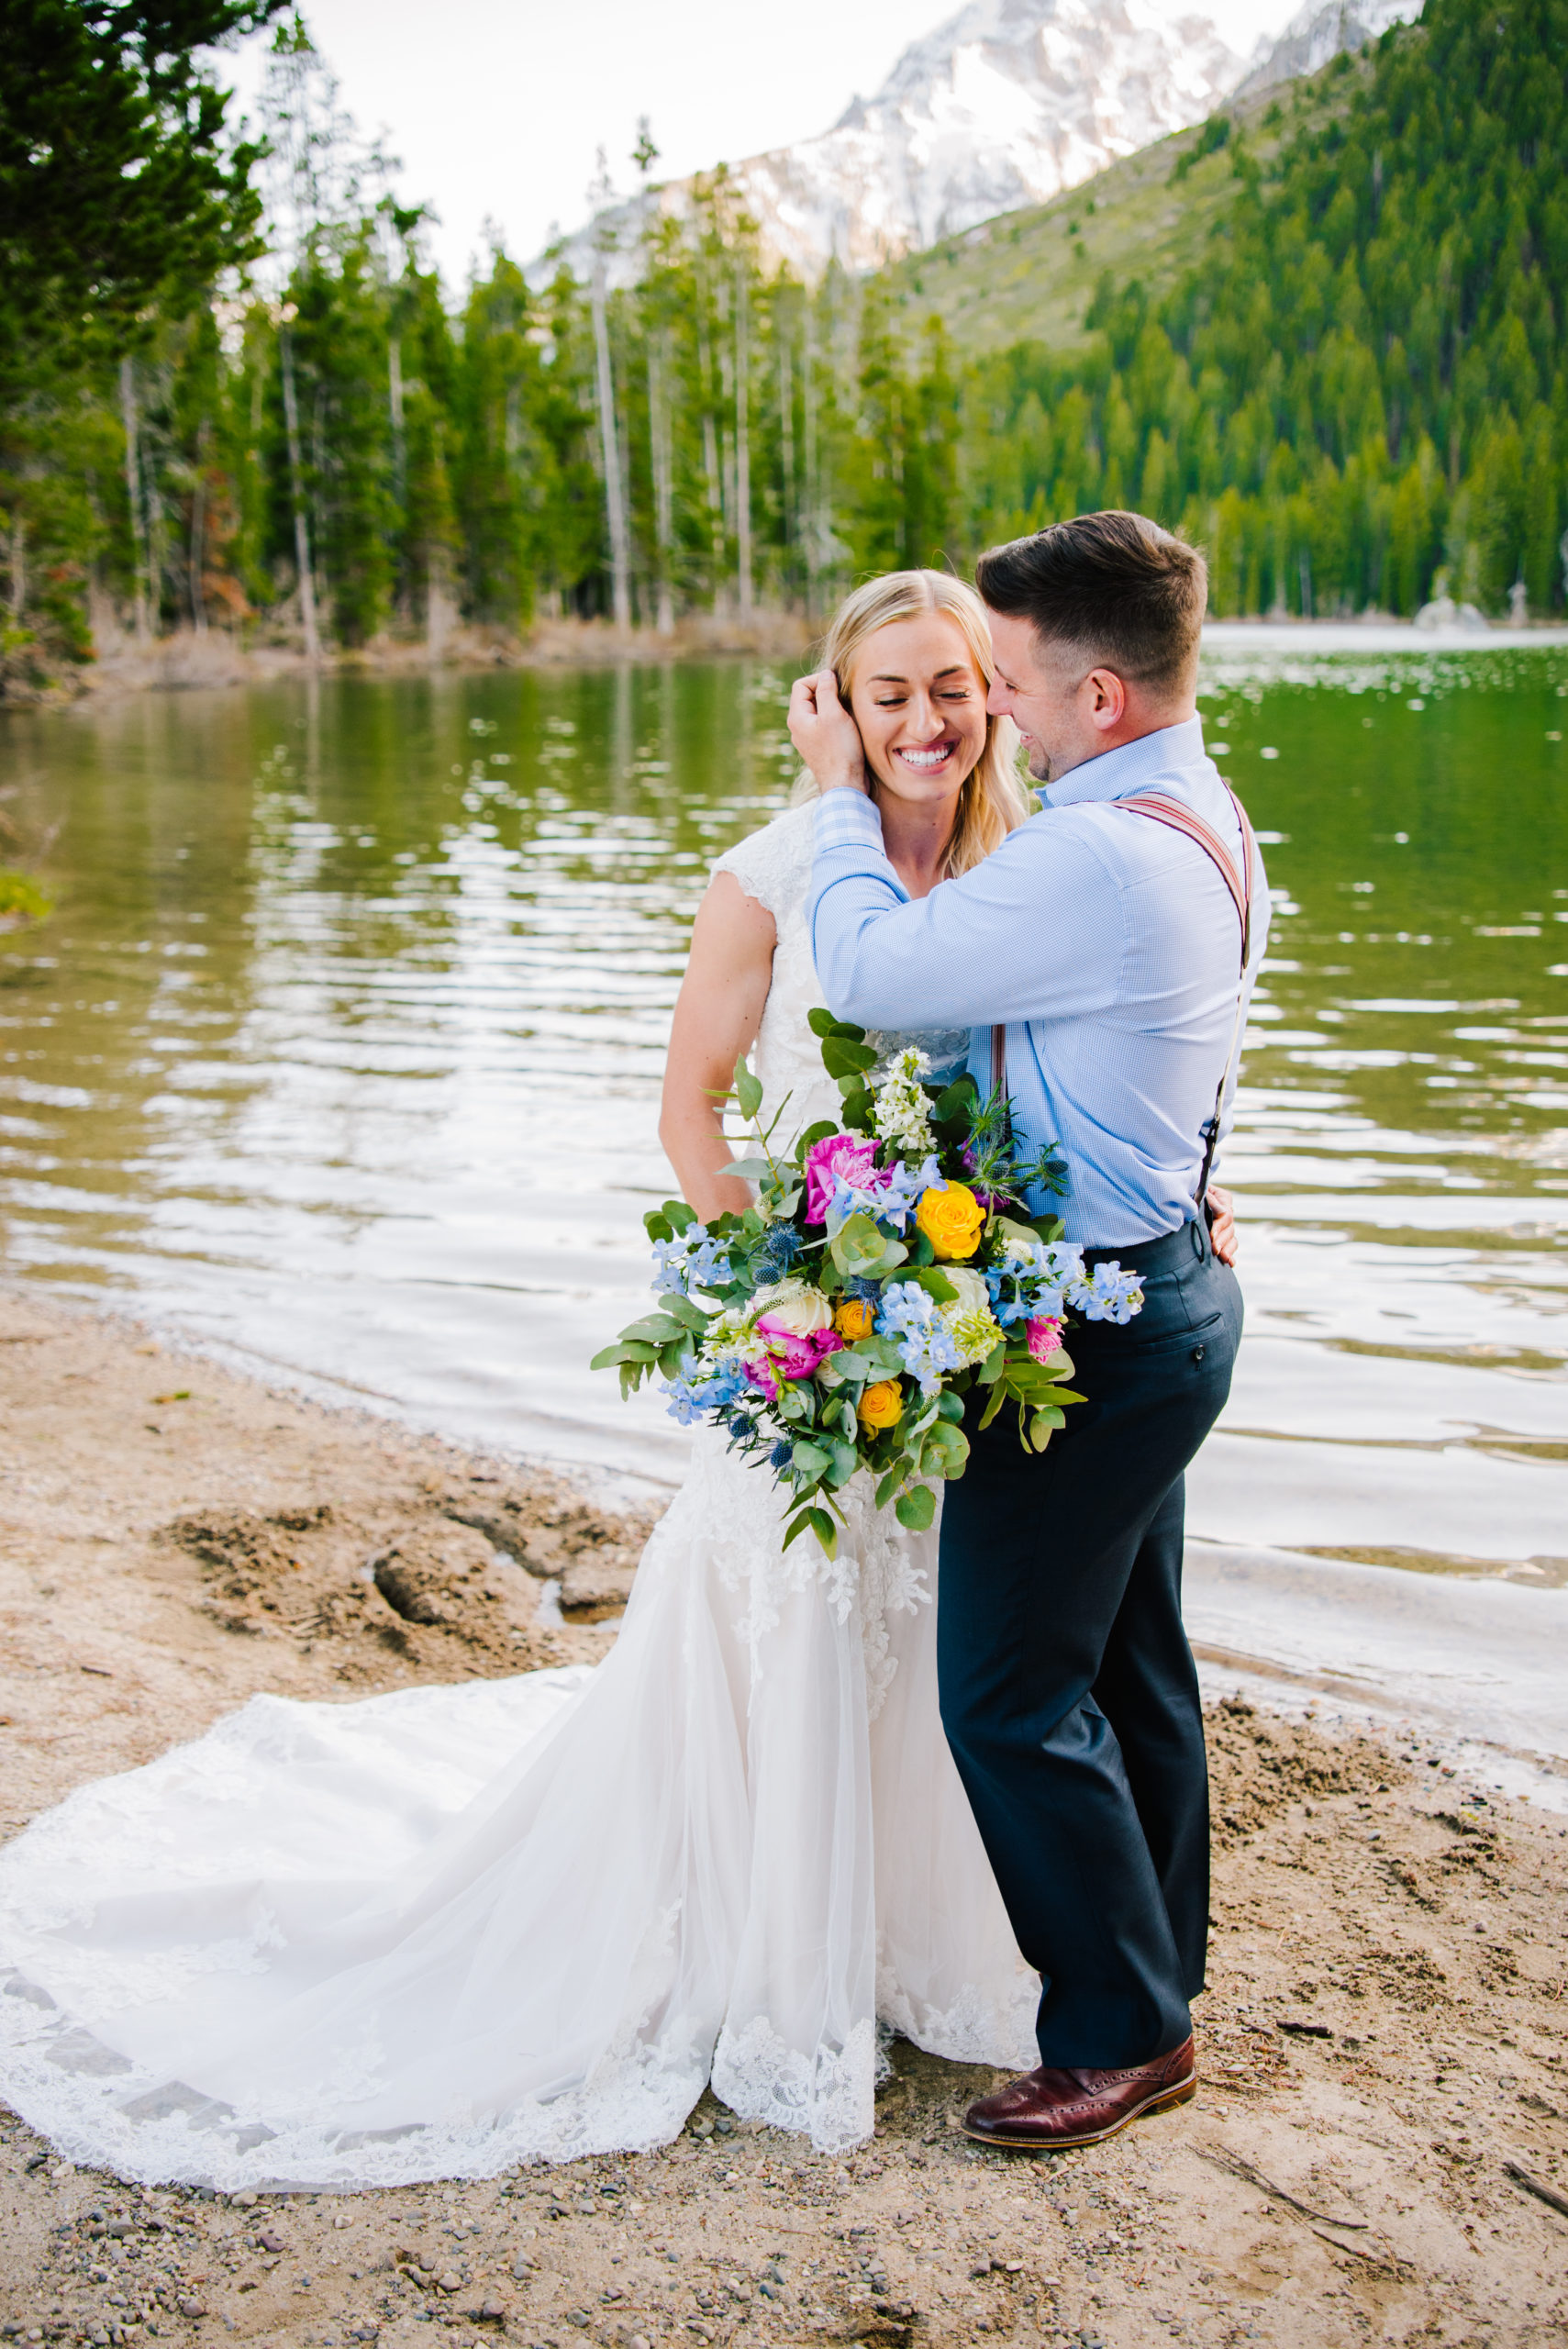 bride and groom embracing in front of a lake as the bride laughs and the groom caresses her face